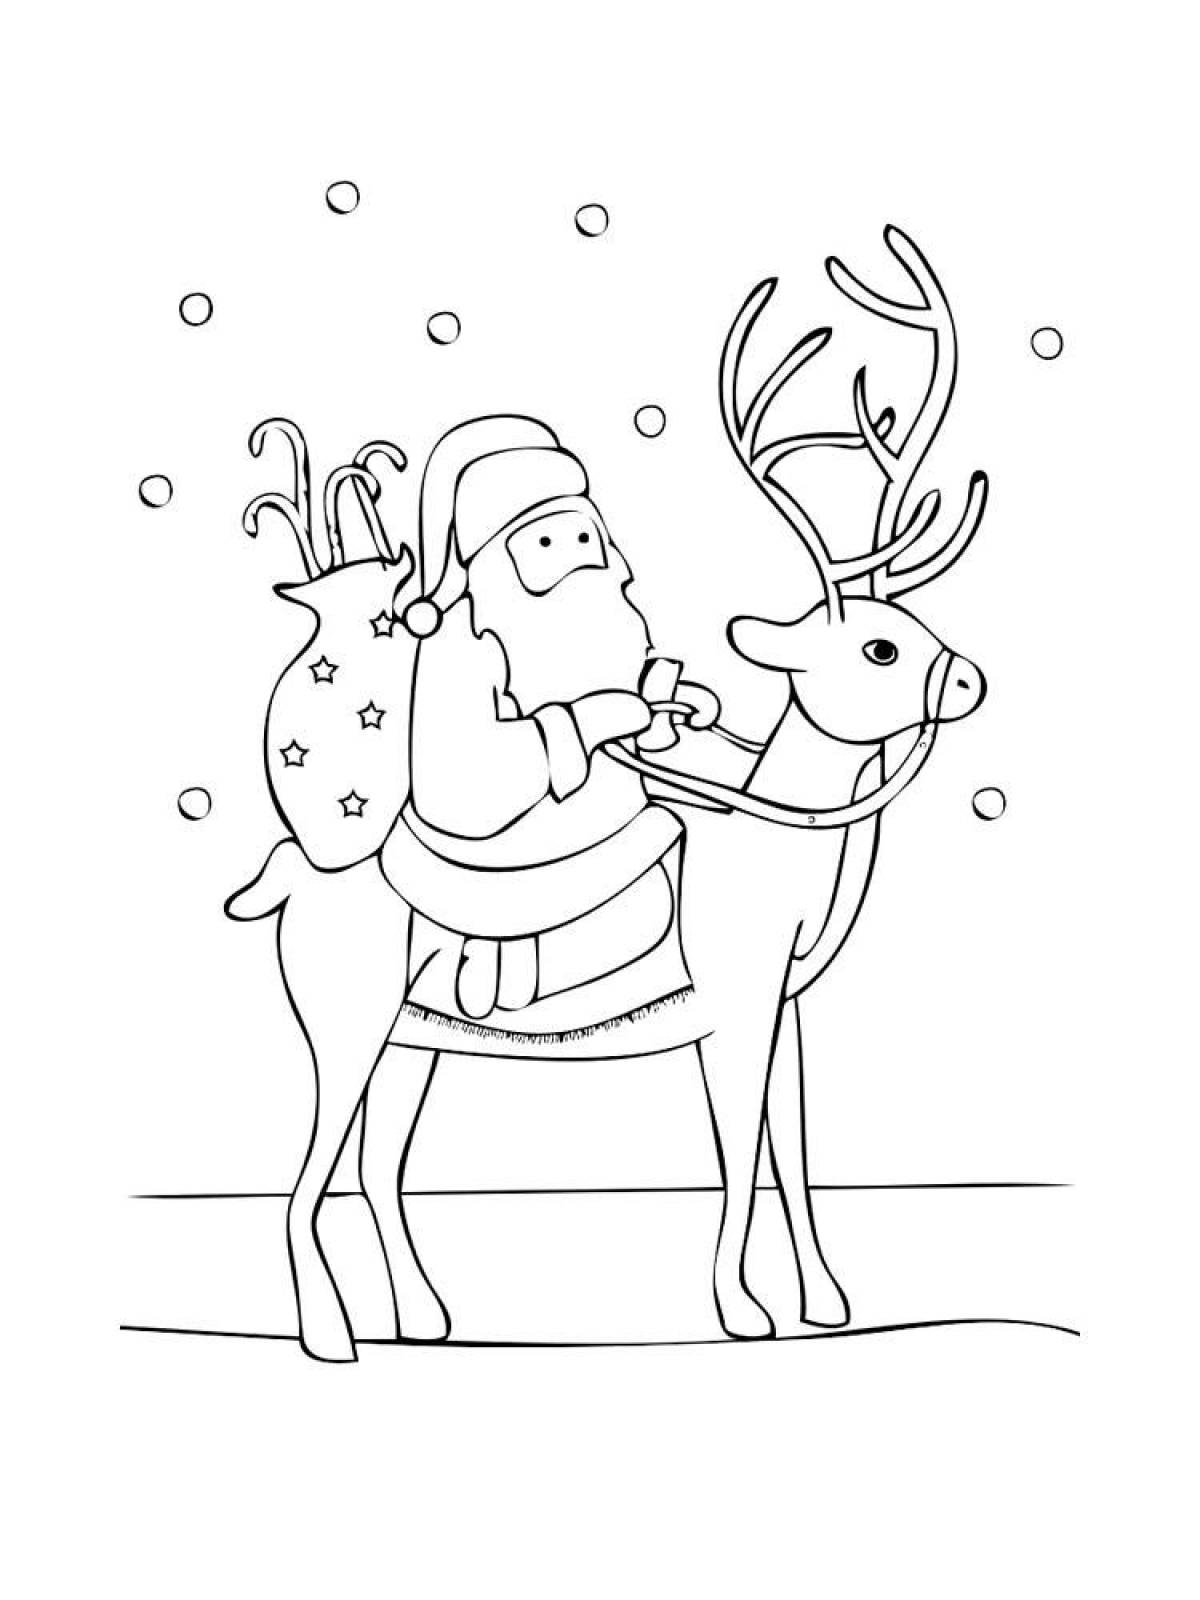 Merry christmas deer coloring page